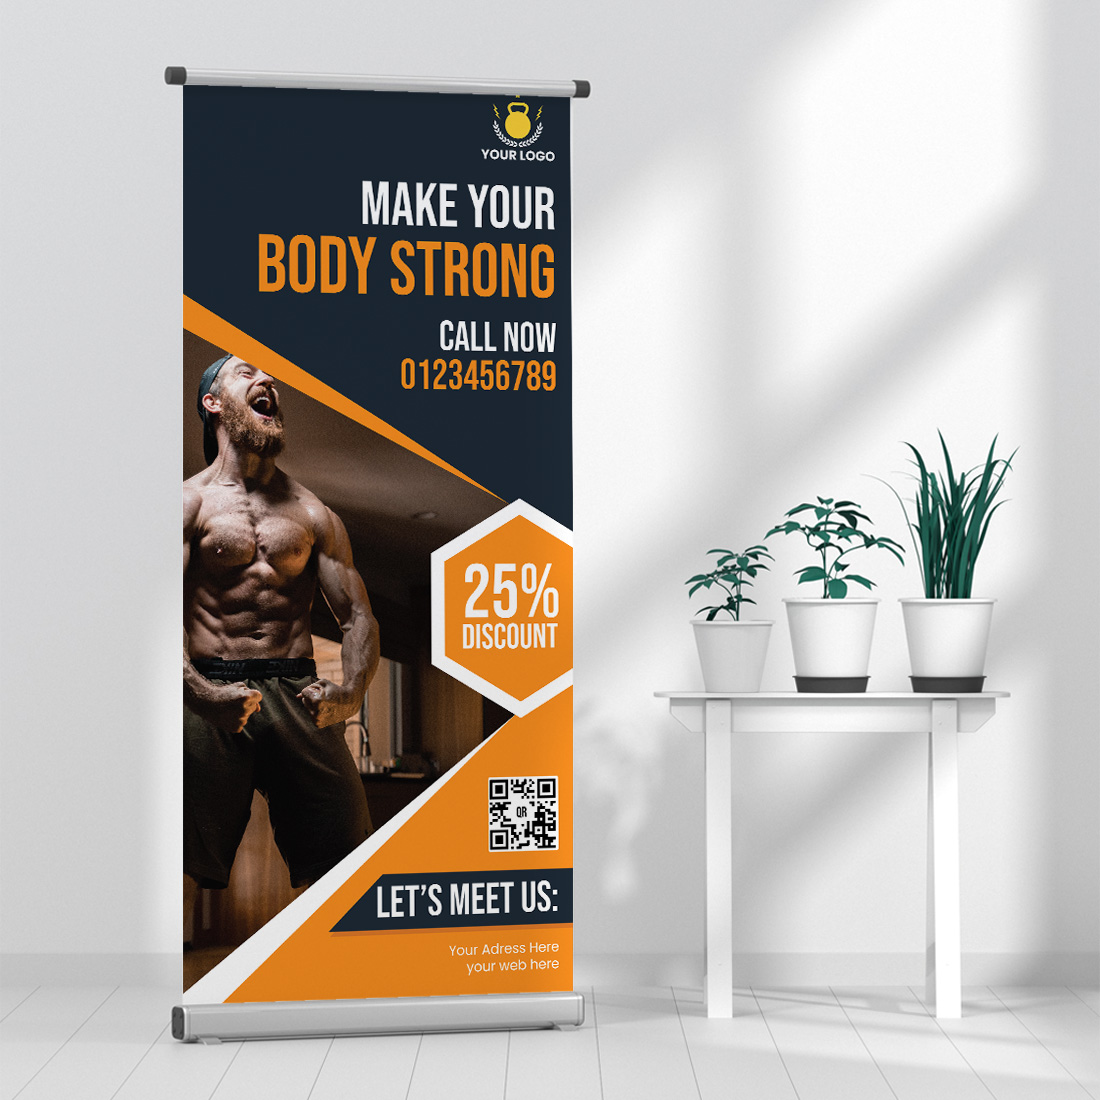 Roll up banner with a picture of a muscular man.